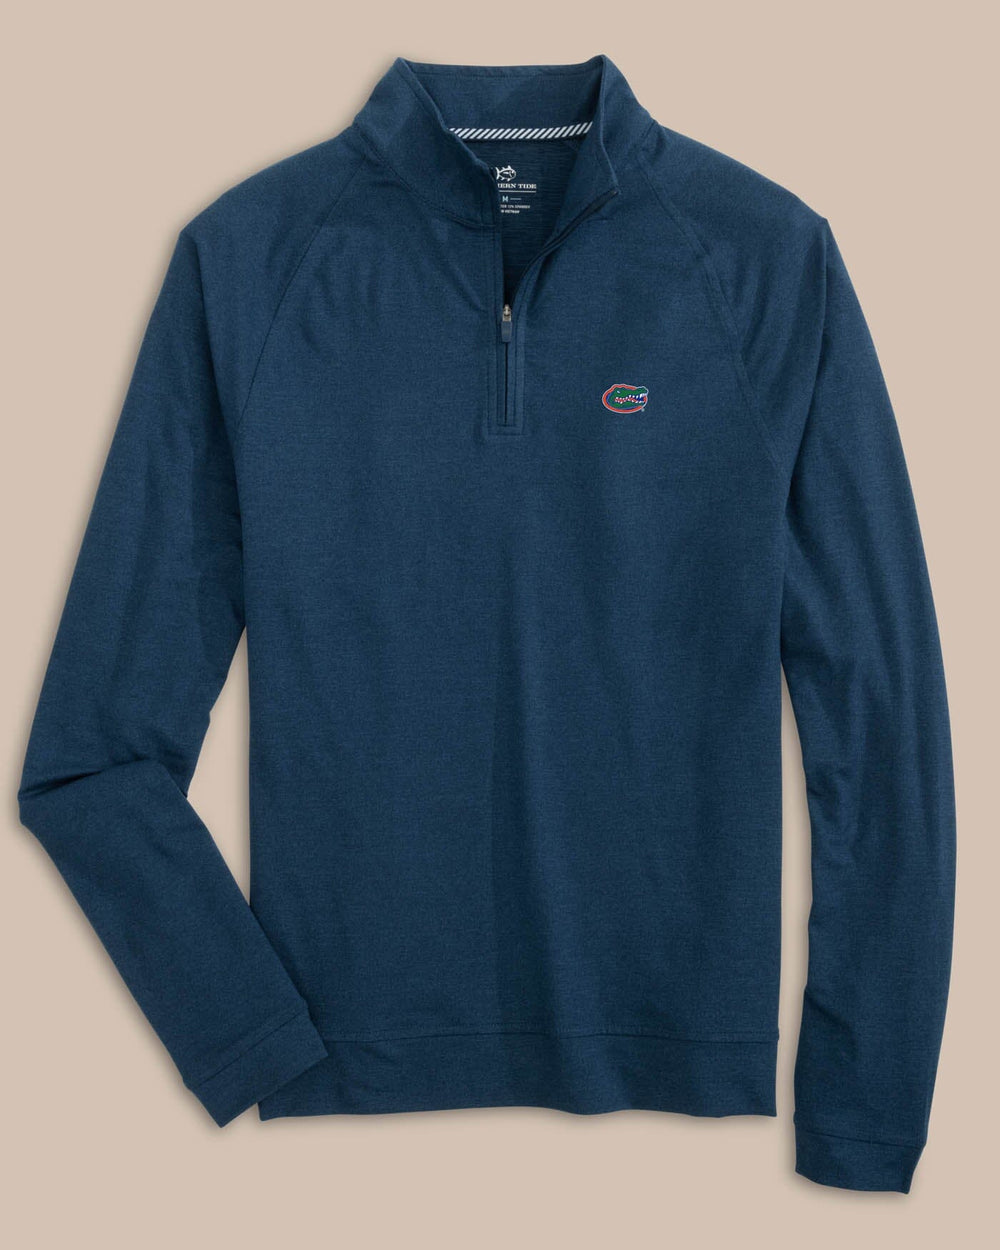 The front view of the Florida Gators Cruiser Heather Quarter Zip Pullover by Southern Tide - Heather Dress Blue